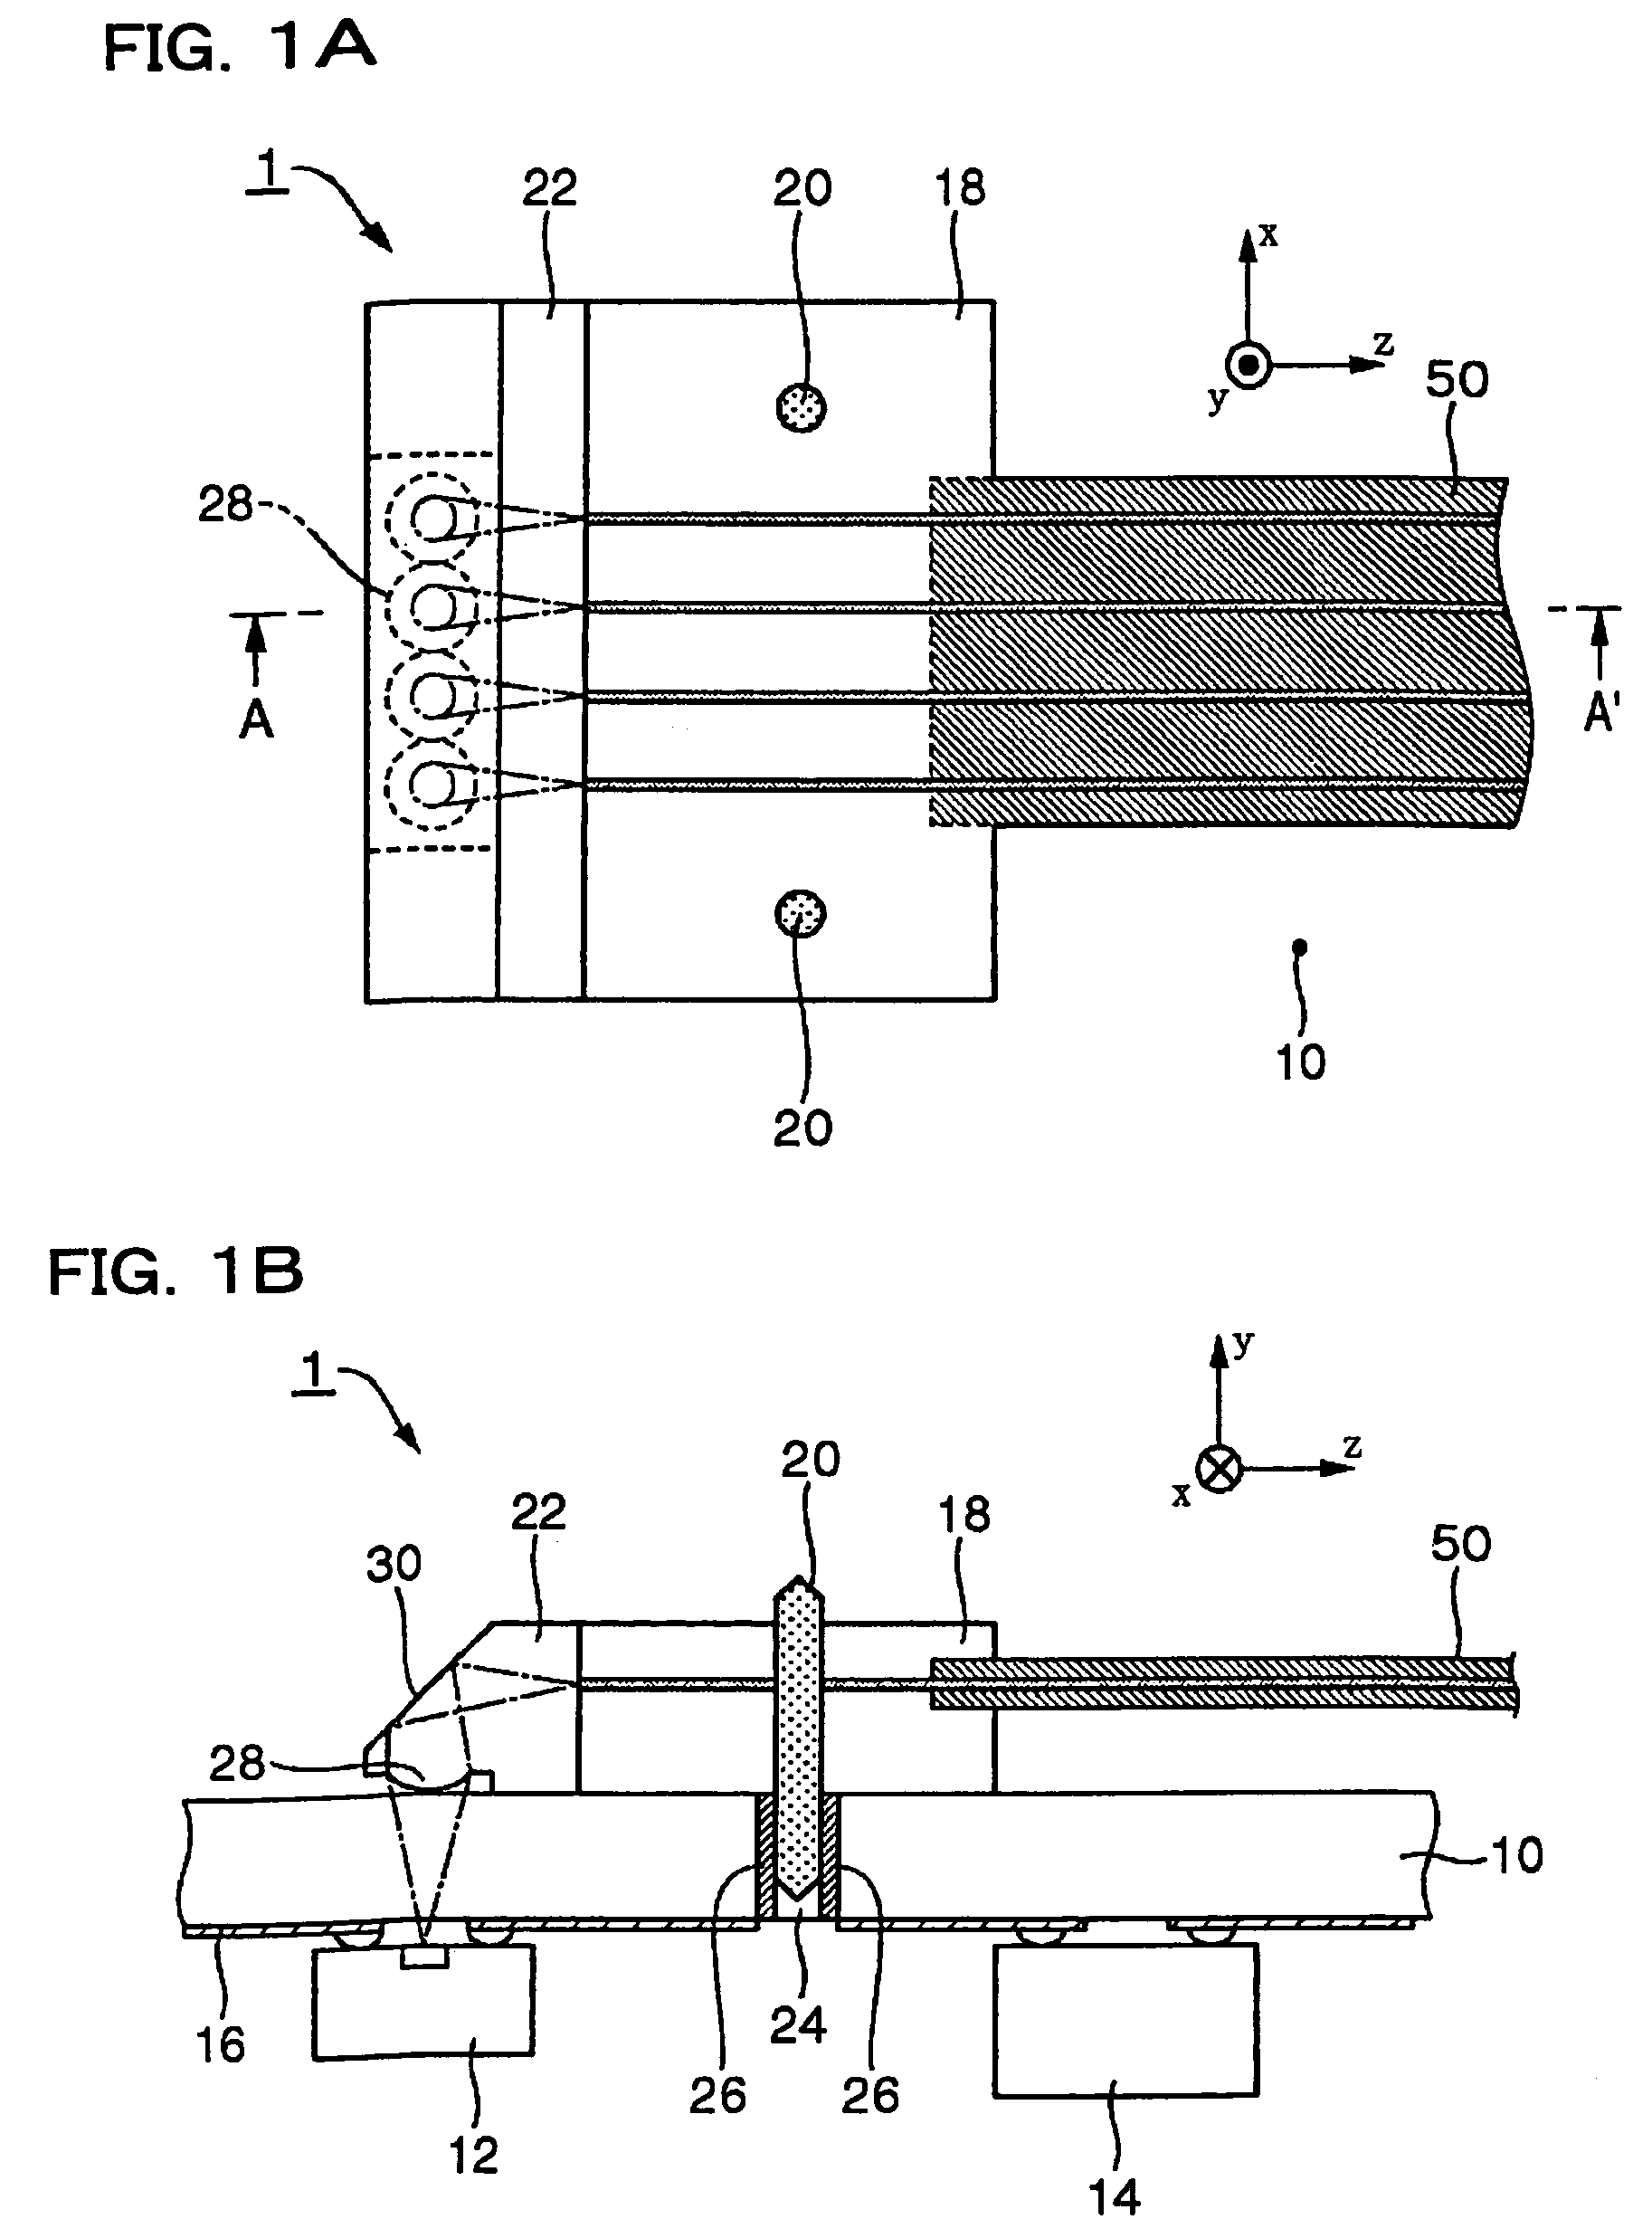 Optical module and method of manufacturing the same, and hybrid integrated circuit, hybrid circuit board, electronic apparatus, opto-electricity mixed device, and method of manufacturing the same